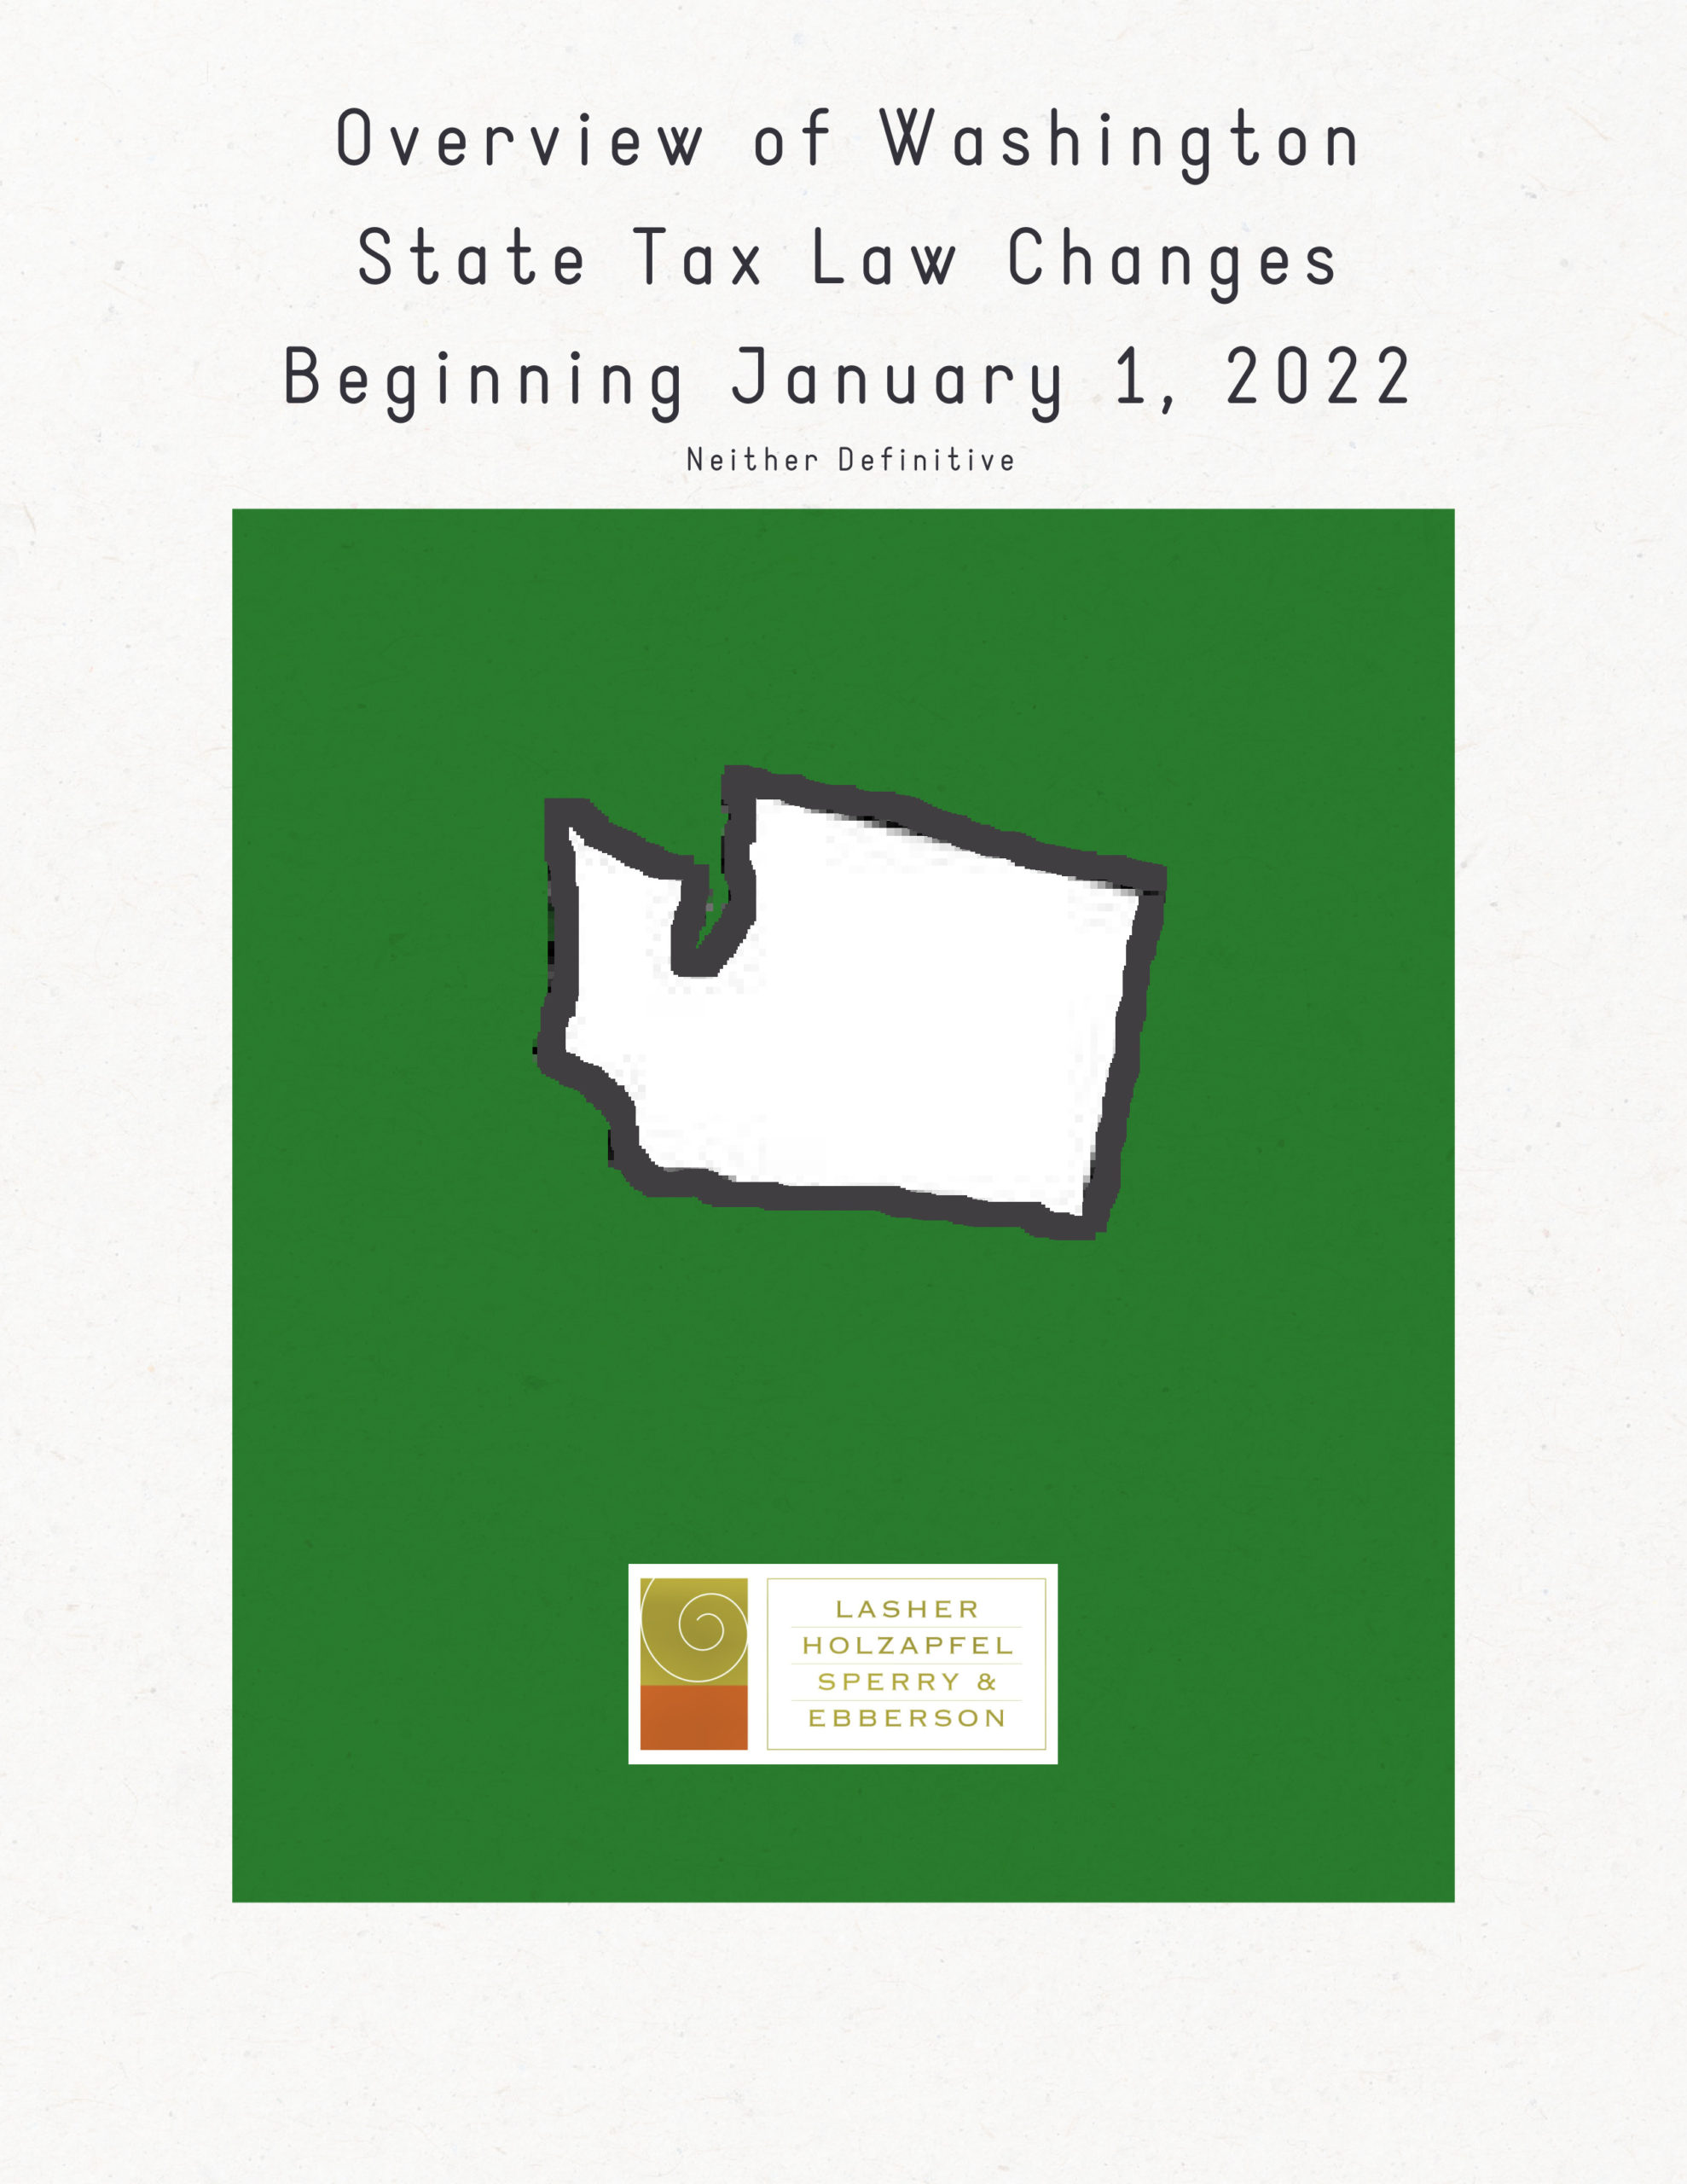 Overview of Washington State Tax Law Changes Beginning January 1, 2022 – Neither Definitive